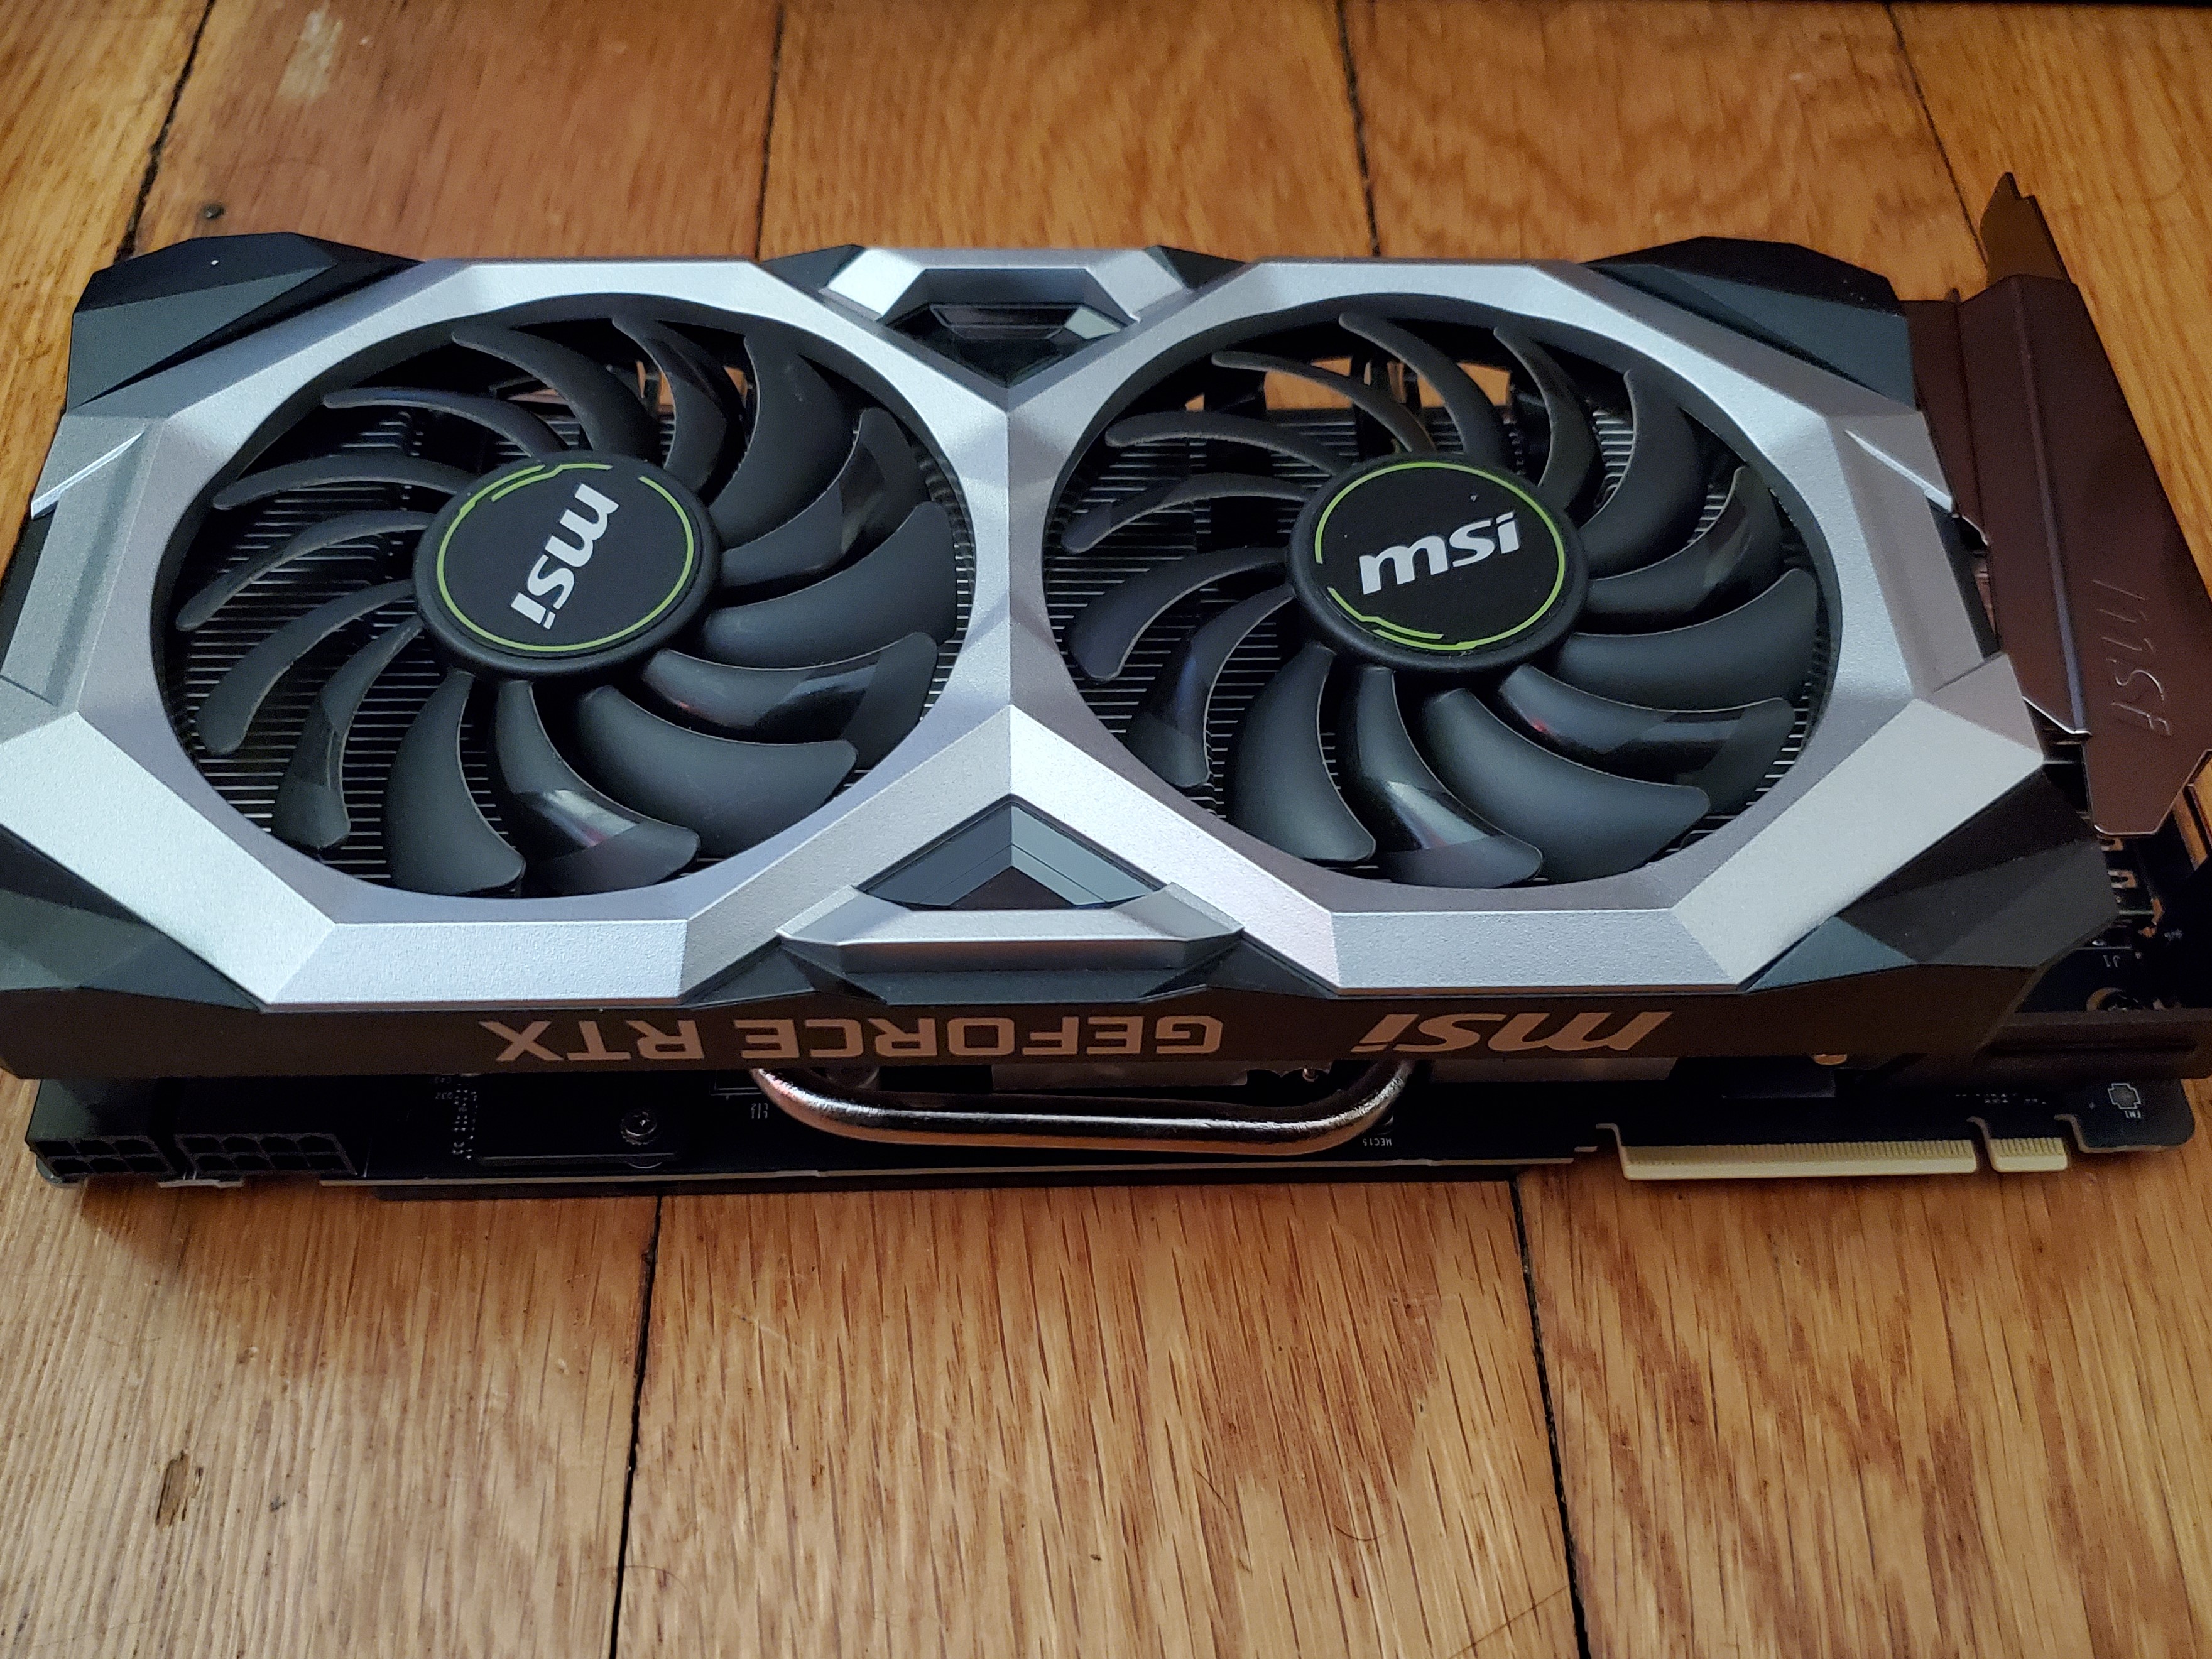 For Sale, MSI RTX 2080 Super Ventus *SOLD* - For Sale - ED Forums